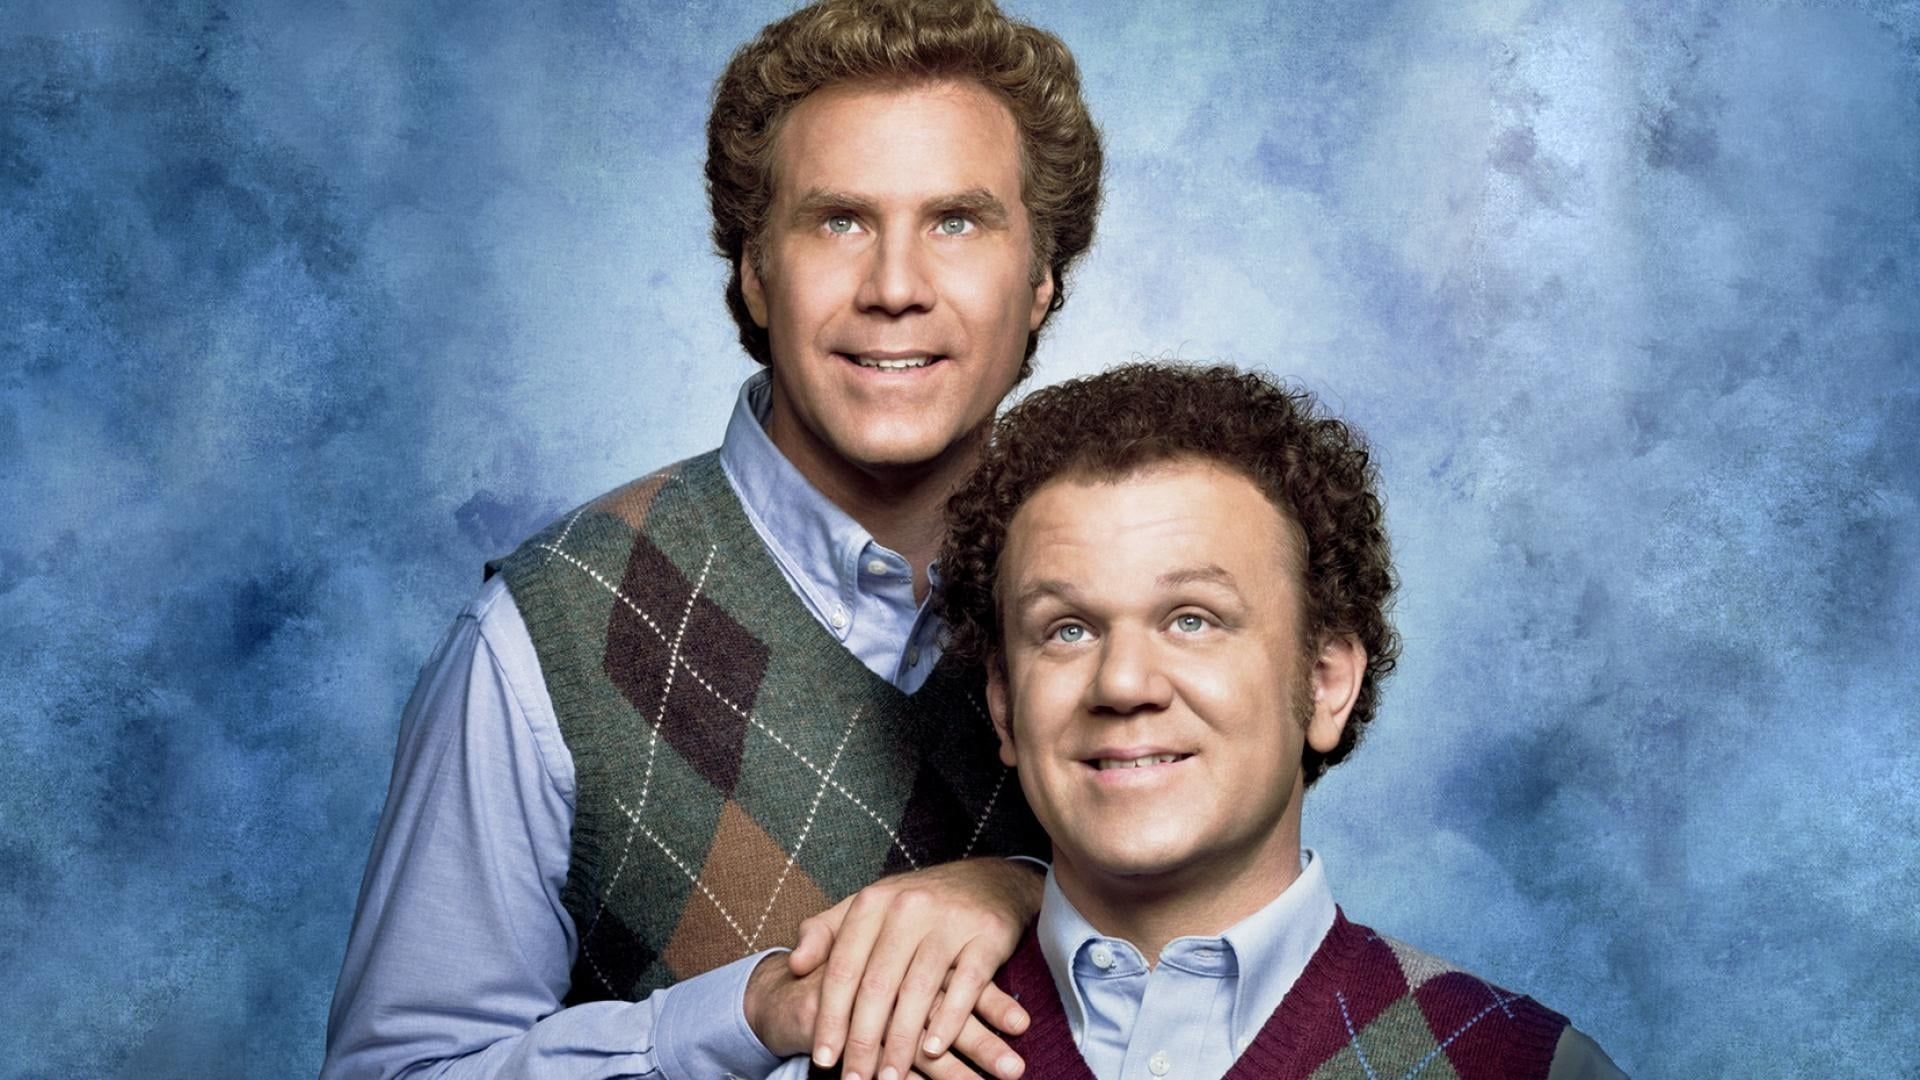 carol whidden recommends step brothers mp4 download pic